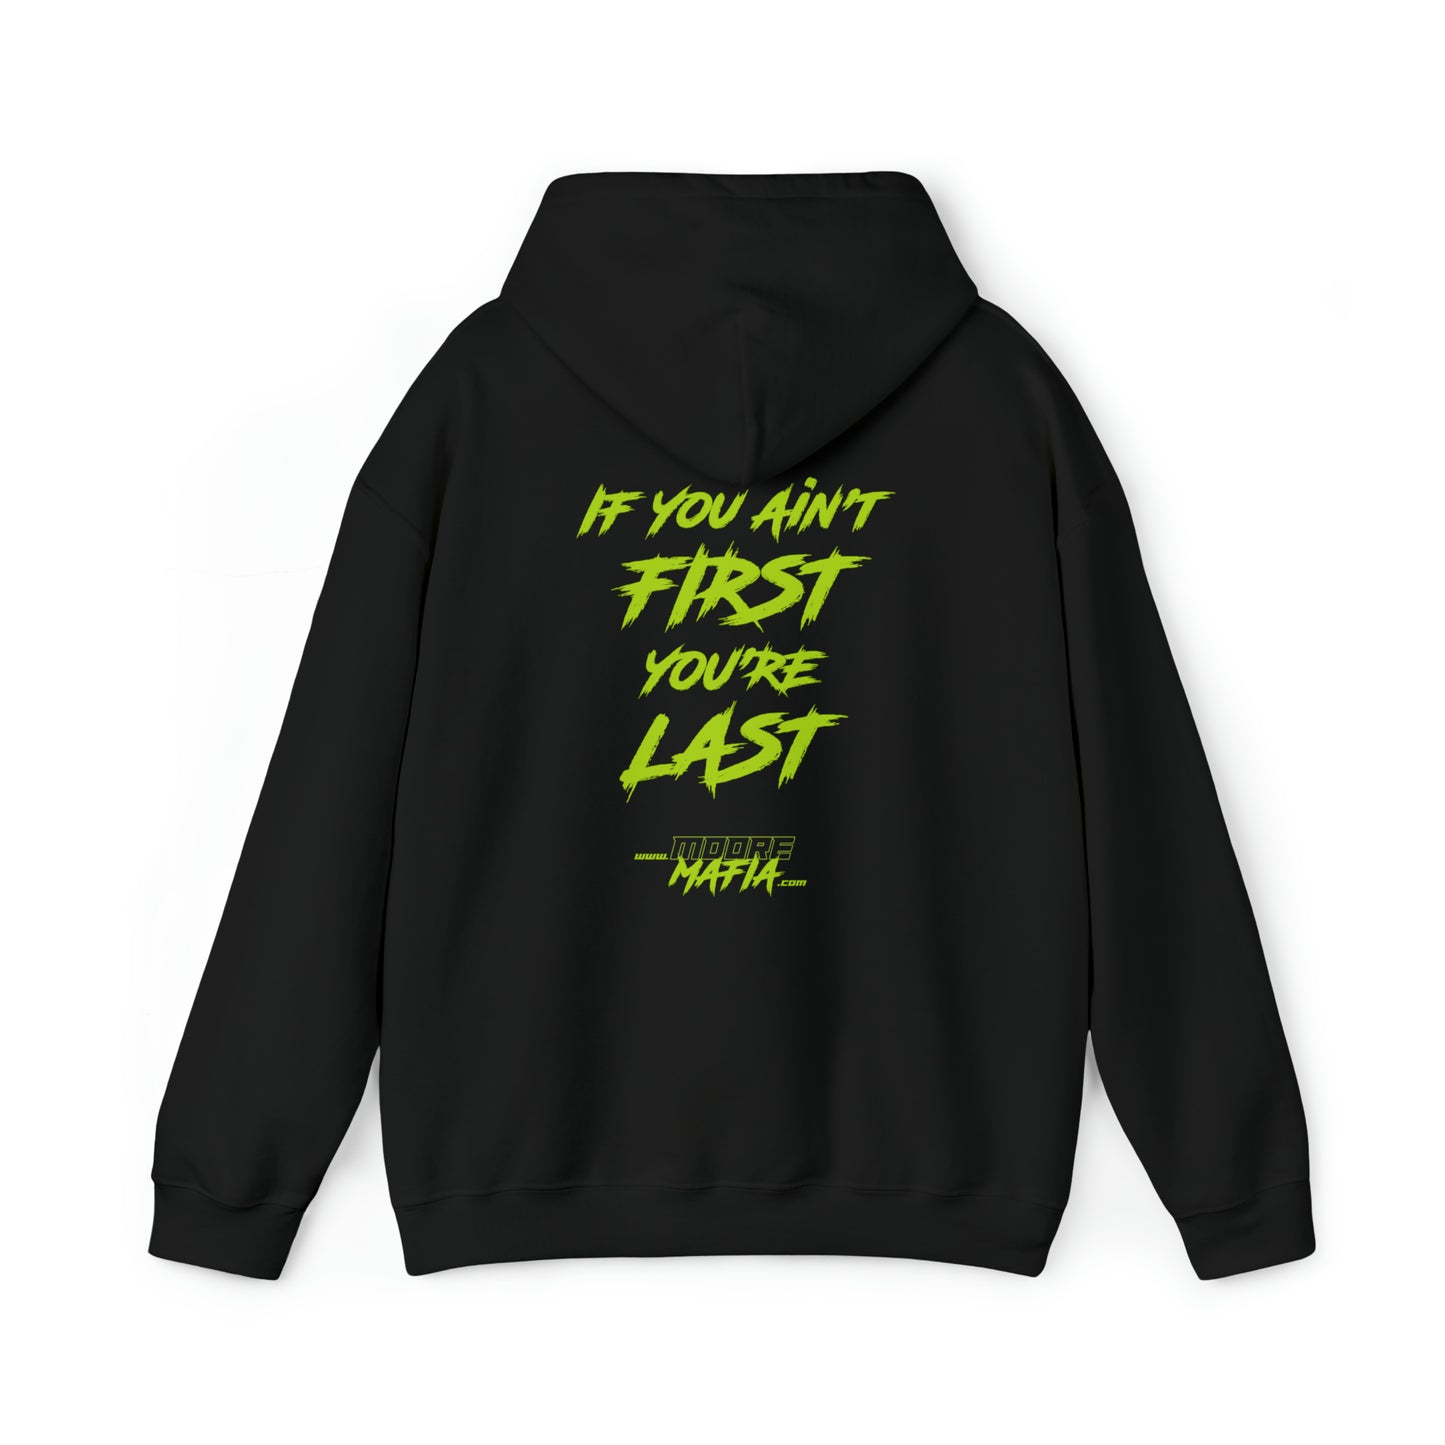 If You Ain't First You're Last Hooded Sweatshirt